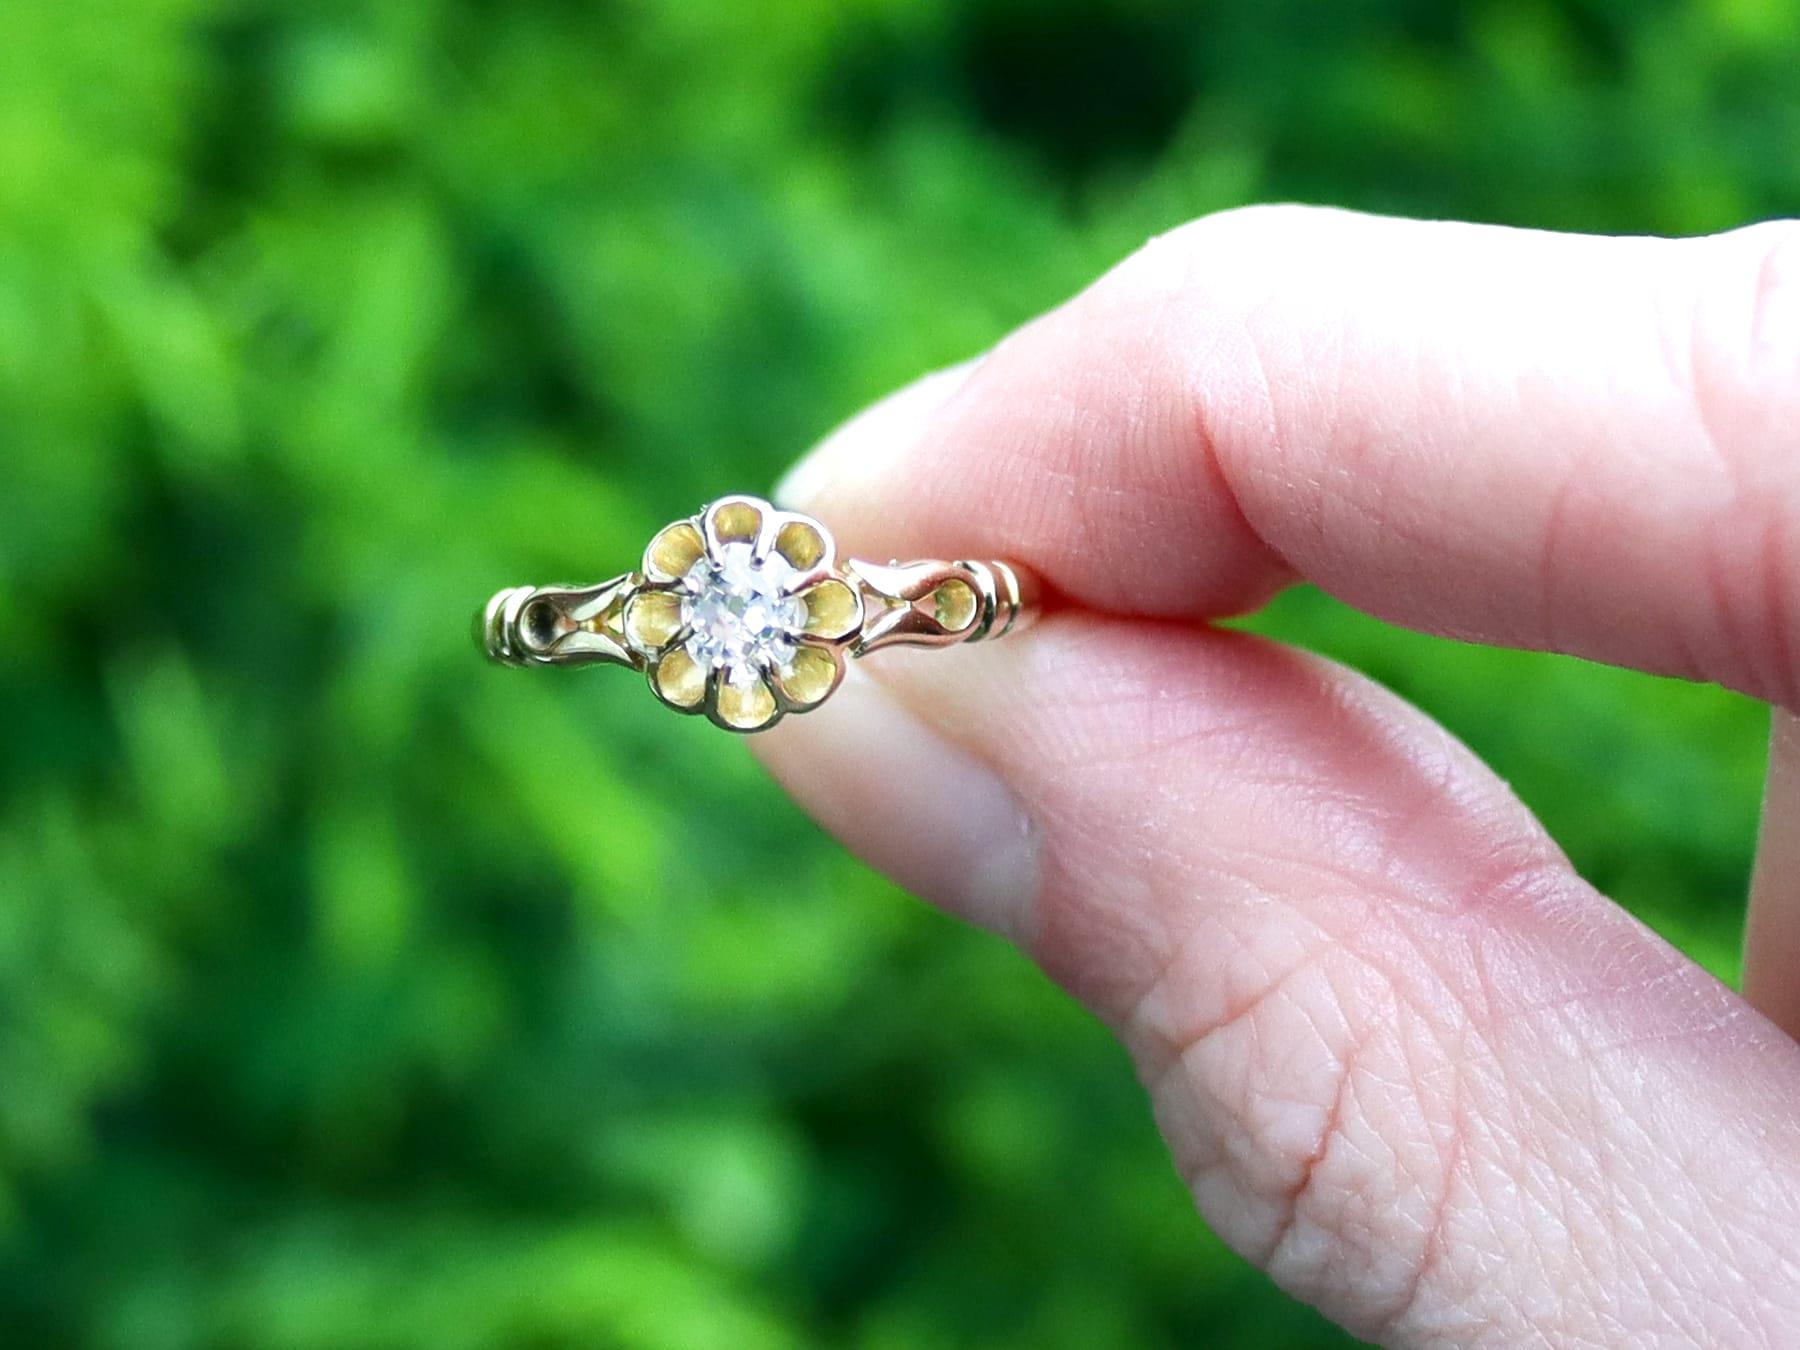 A fine and impressive 0.33 carat diamond and 18 karat yellow gold solitaire ring; part of our diverse antique jewelry and estate jewelry collections

This fine and impressive antique 0.33Ct diamond solitaire ring has been crafted in 18k yellow